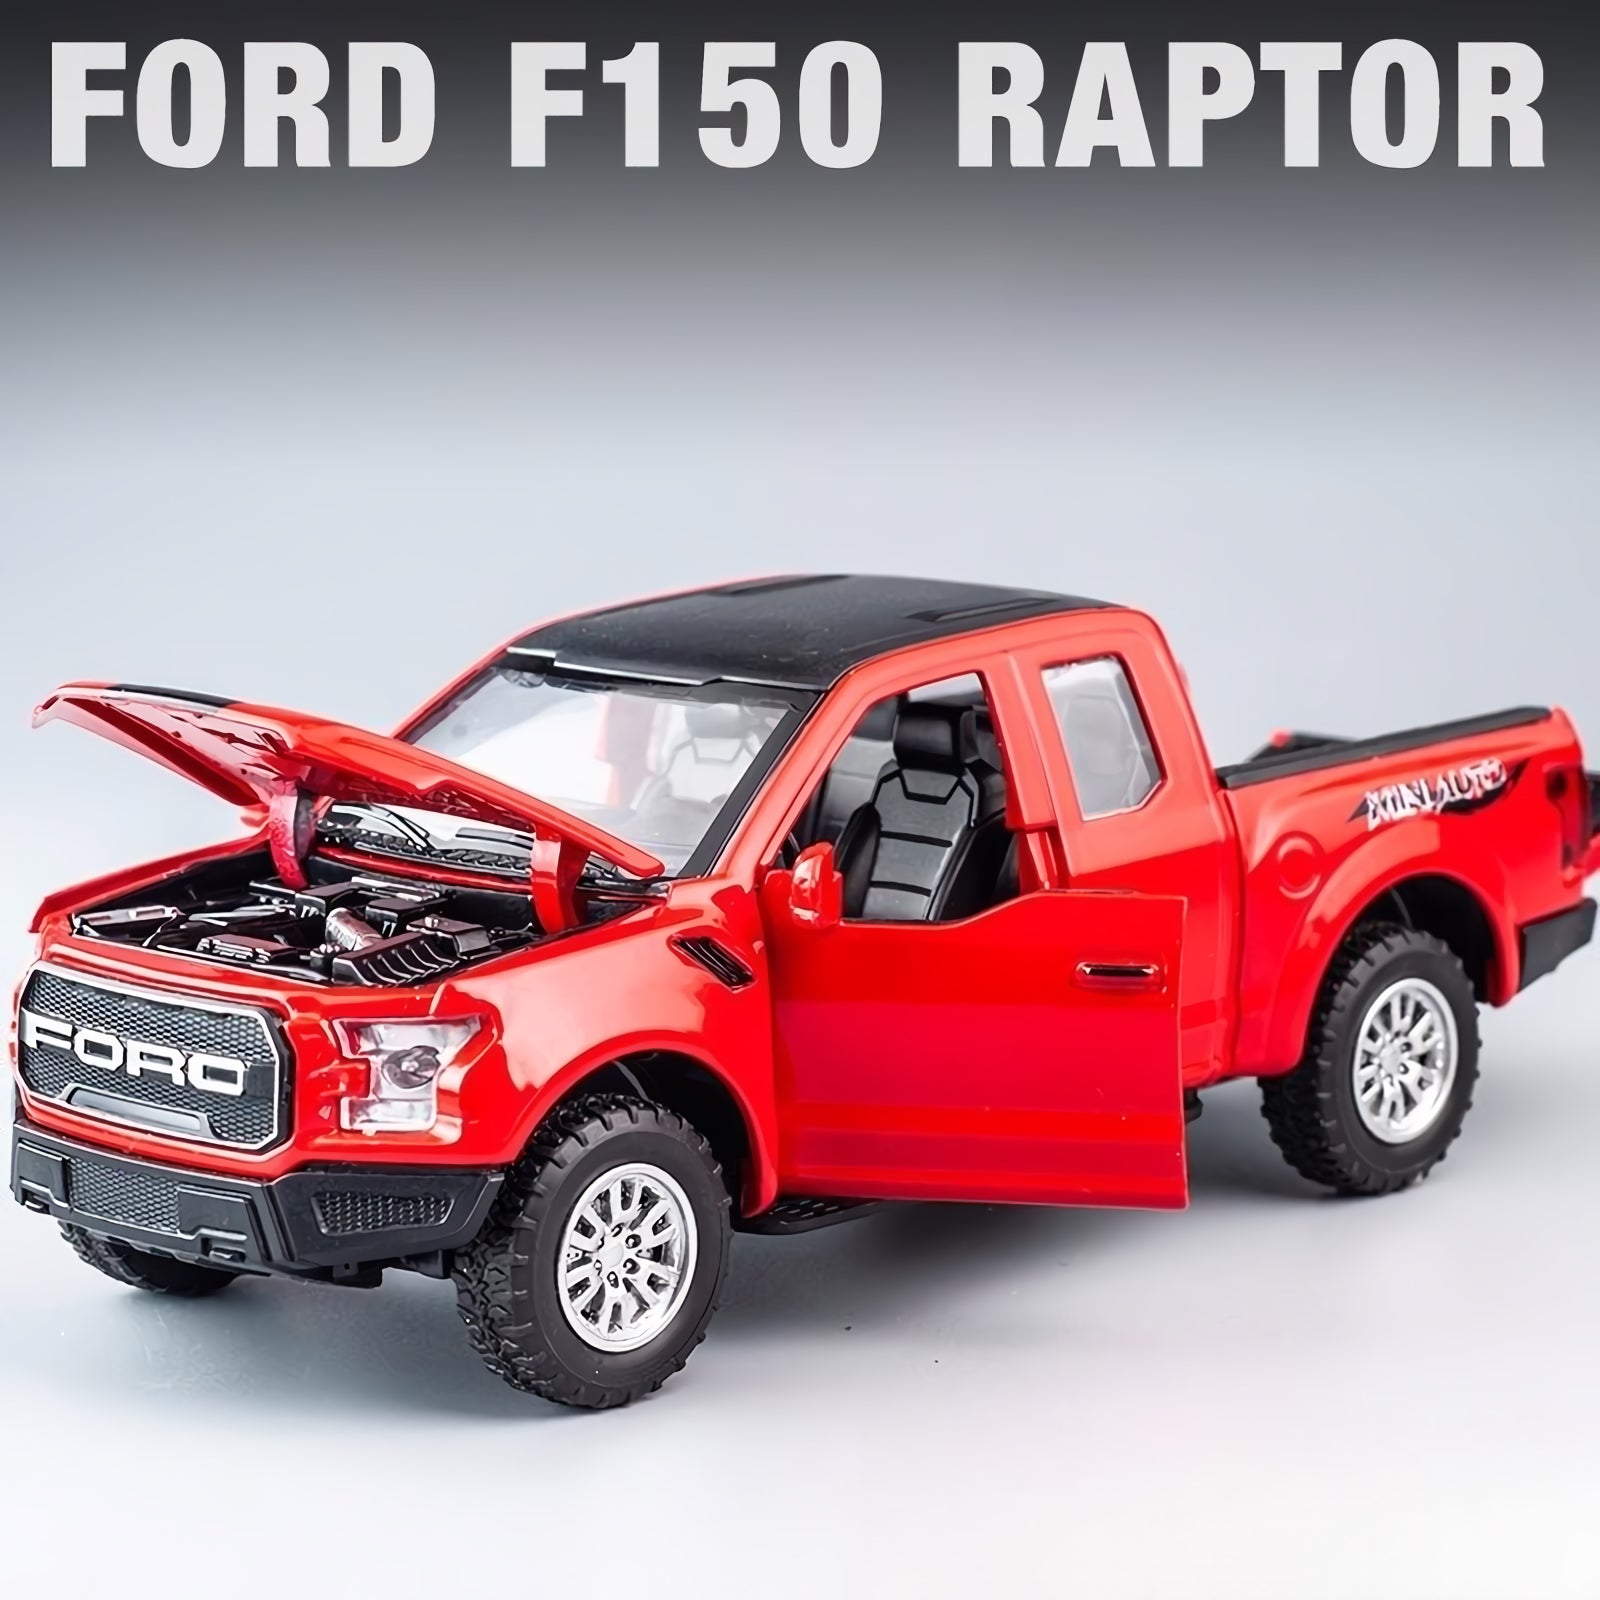 1:32 Scale Ford Raptor F150 Pick-Up Alloy Die-Cast Model Car